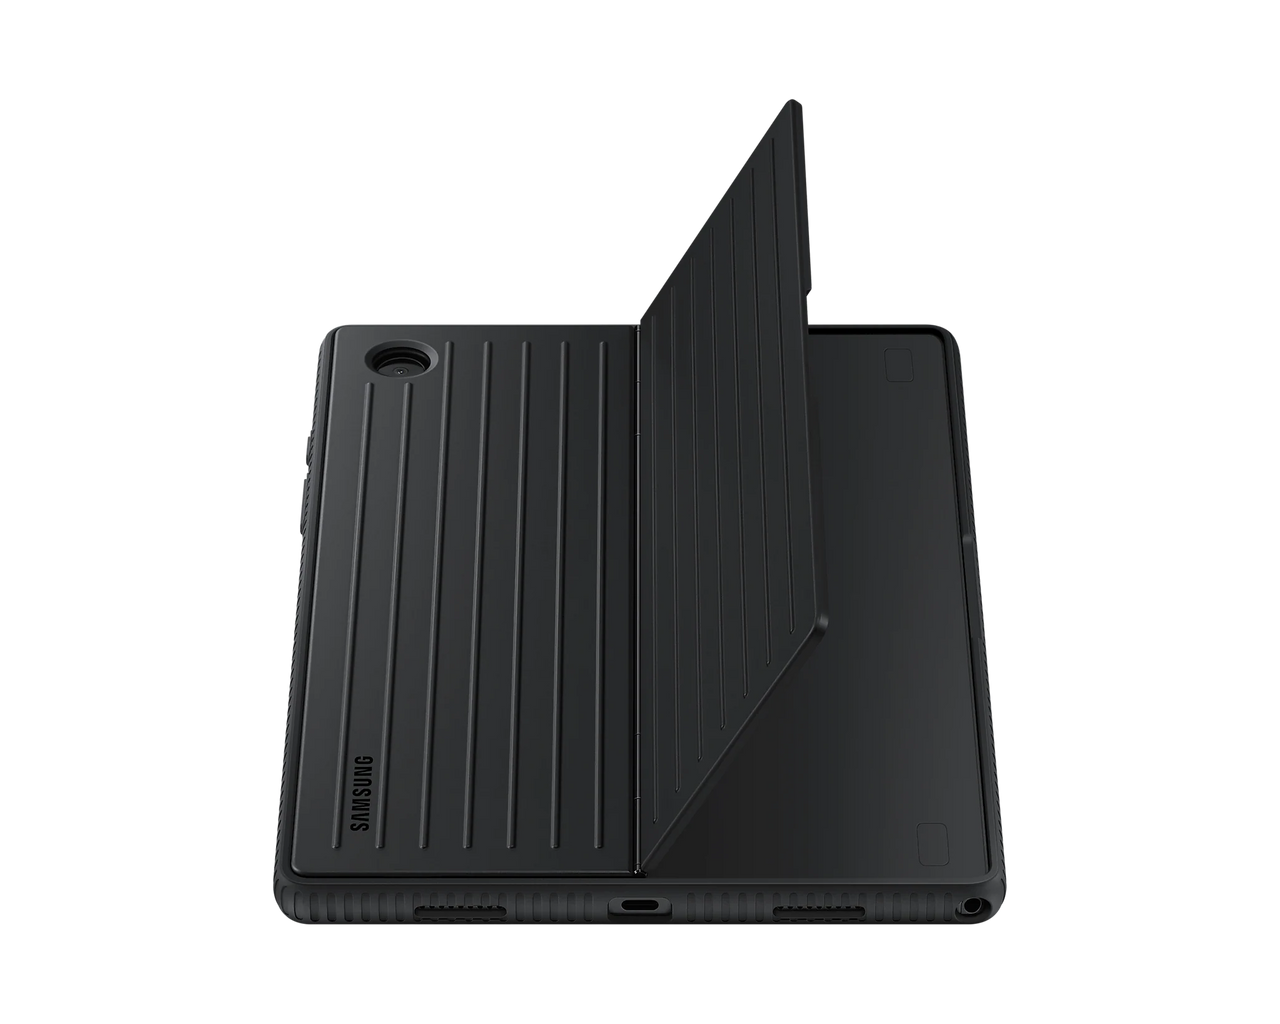 Samsung Galaxy Tab A8 Protective Standing Cover - Black